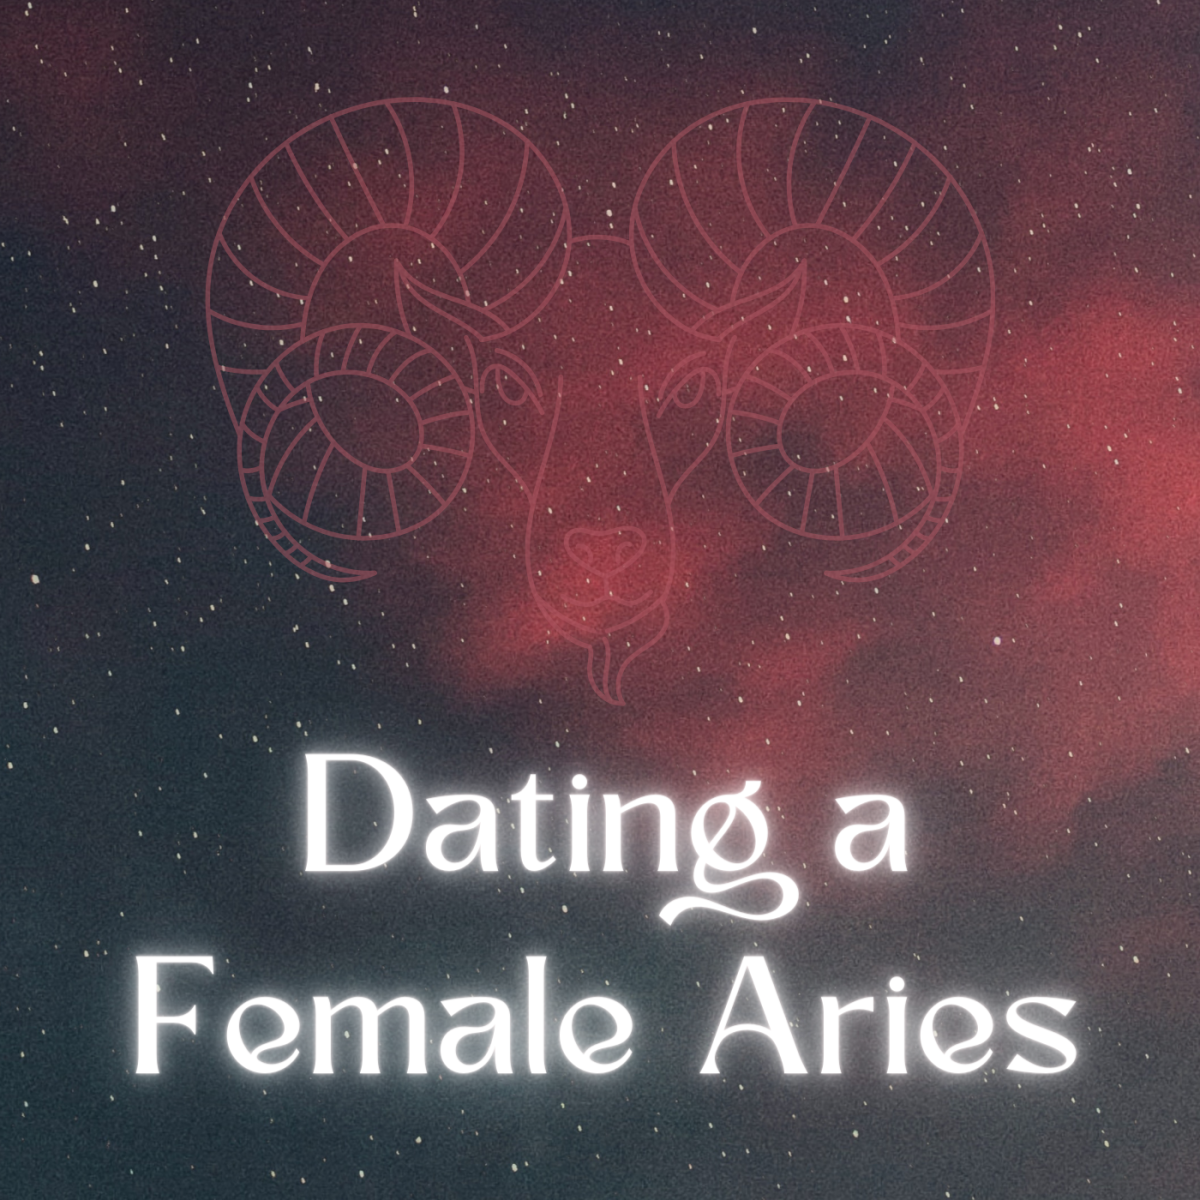 What does a female Aries want in a relationship? This tongue-in-cheek article will help you find out!